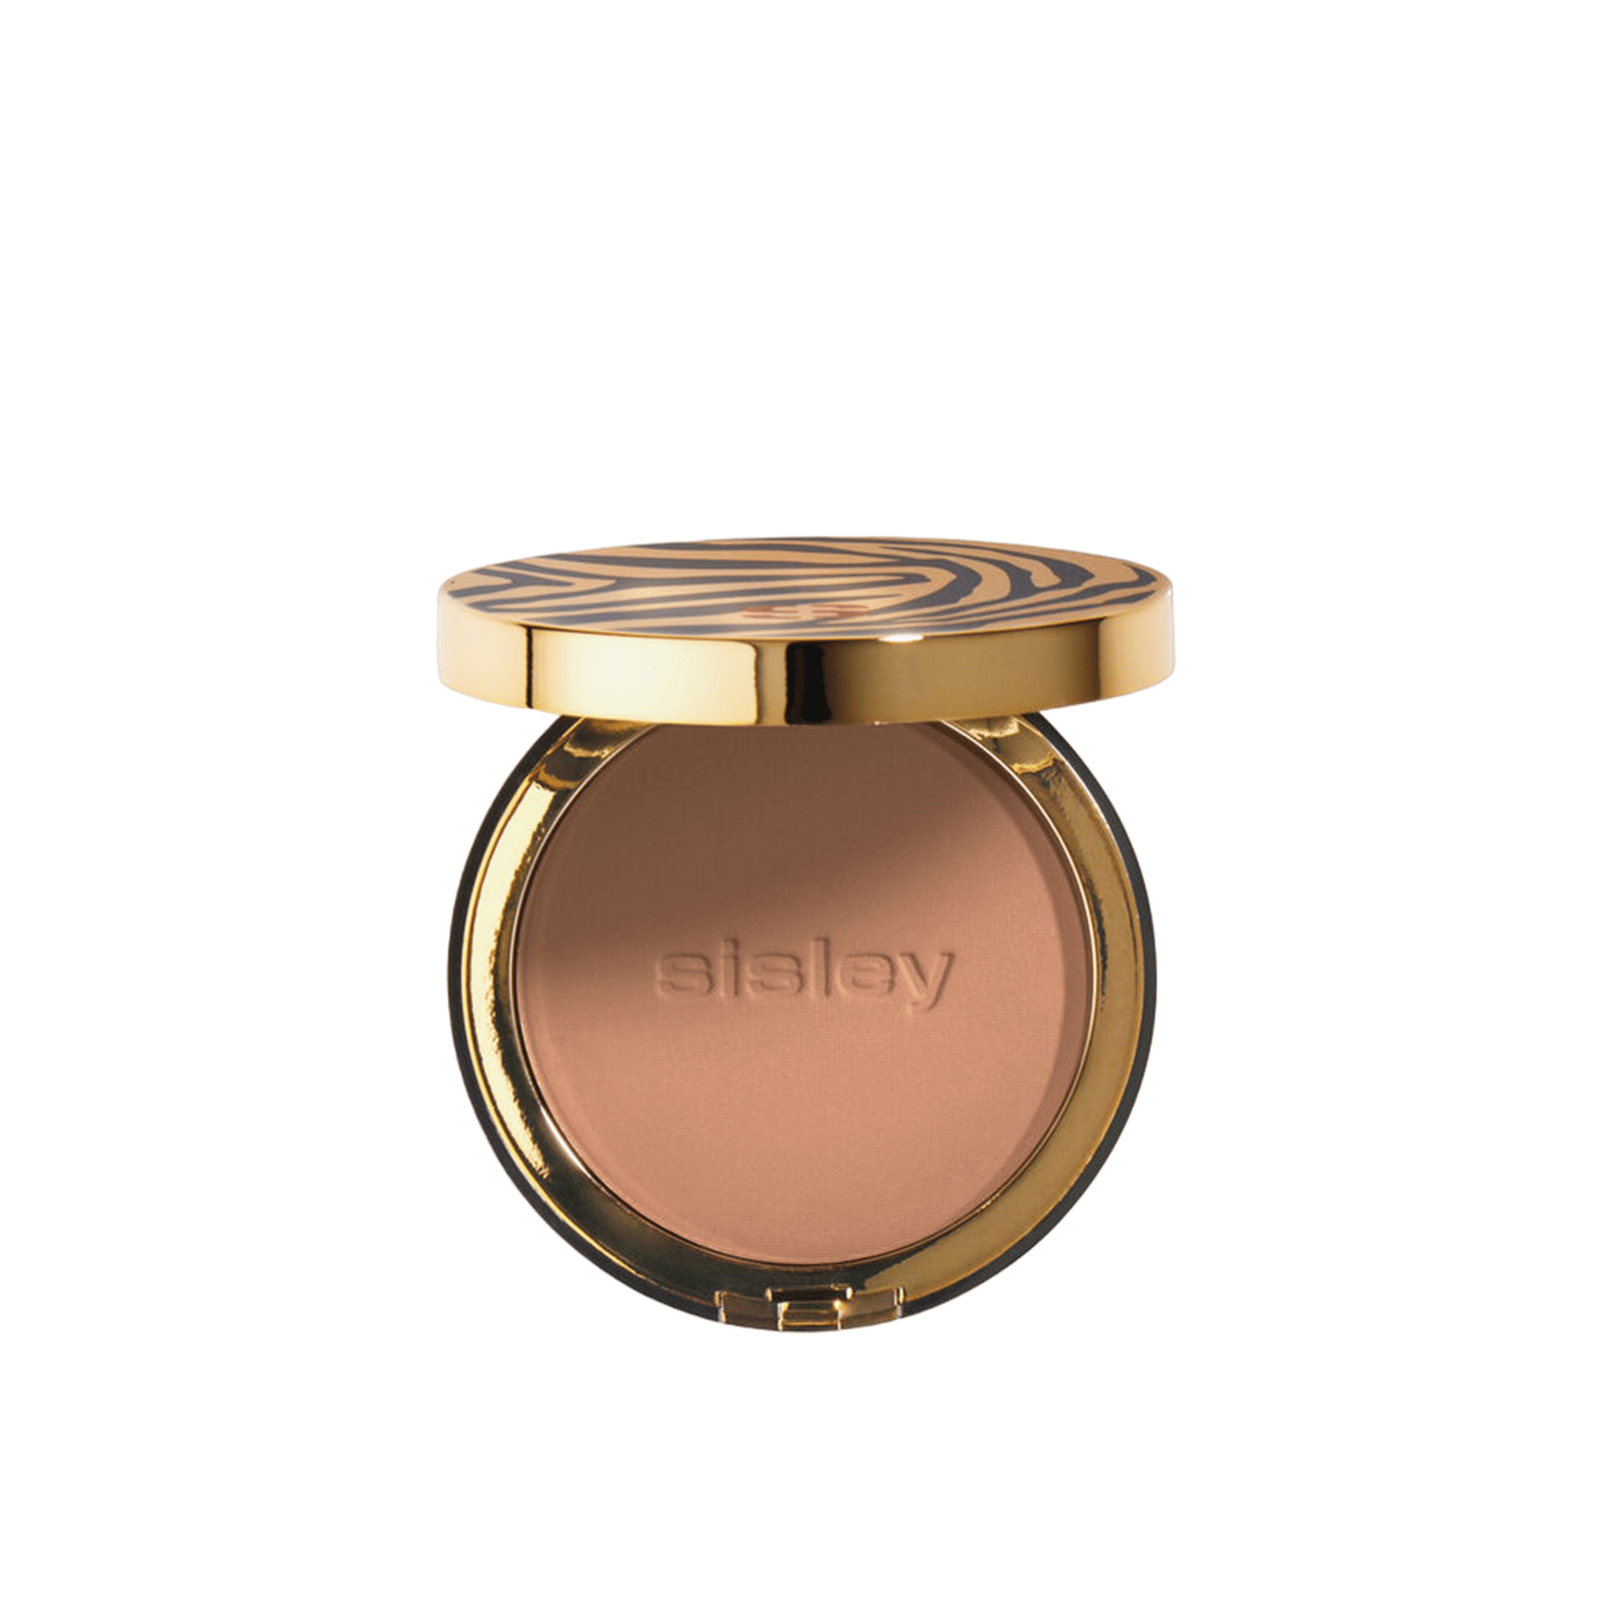 Sisley Paris Phyto-Poudre Compacte Matifying And Beautifying Pressed Powder 4 Bronze 12g (0.42 oz)